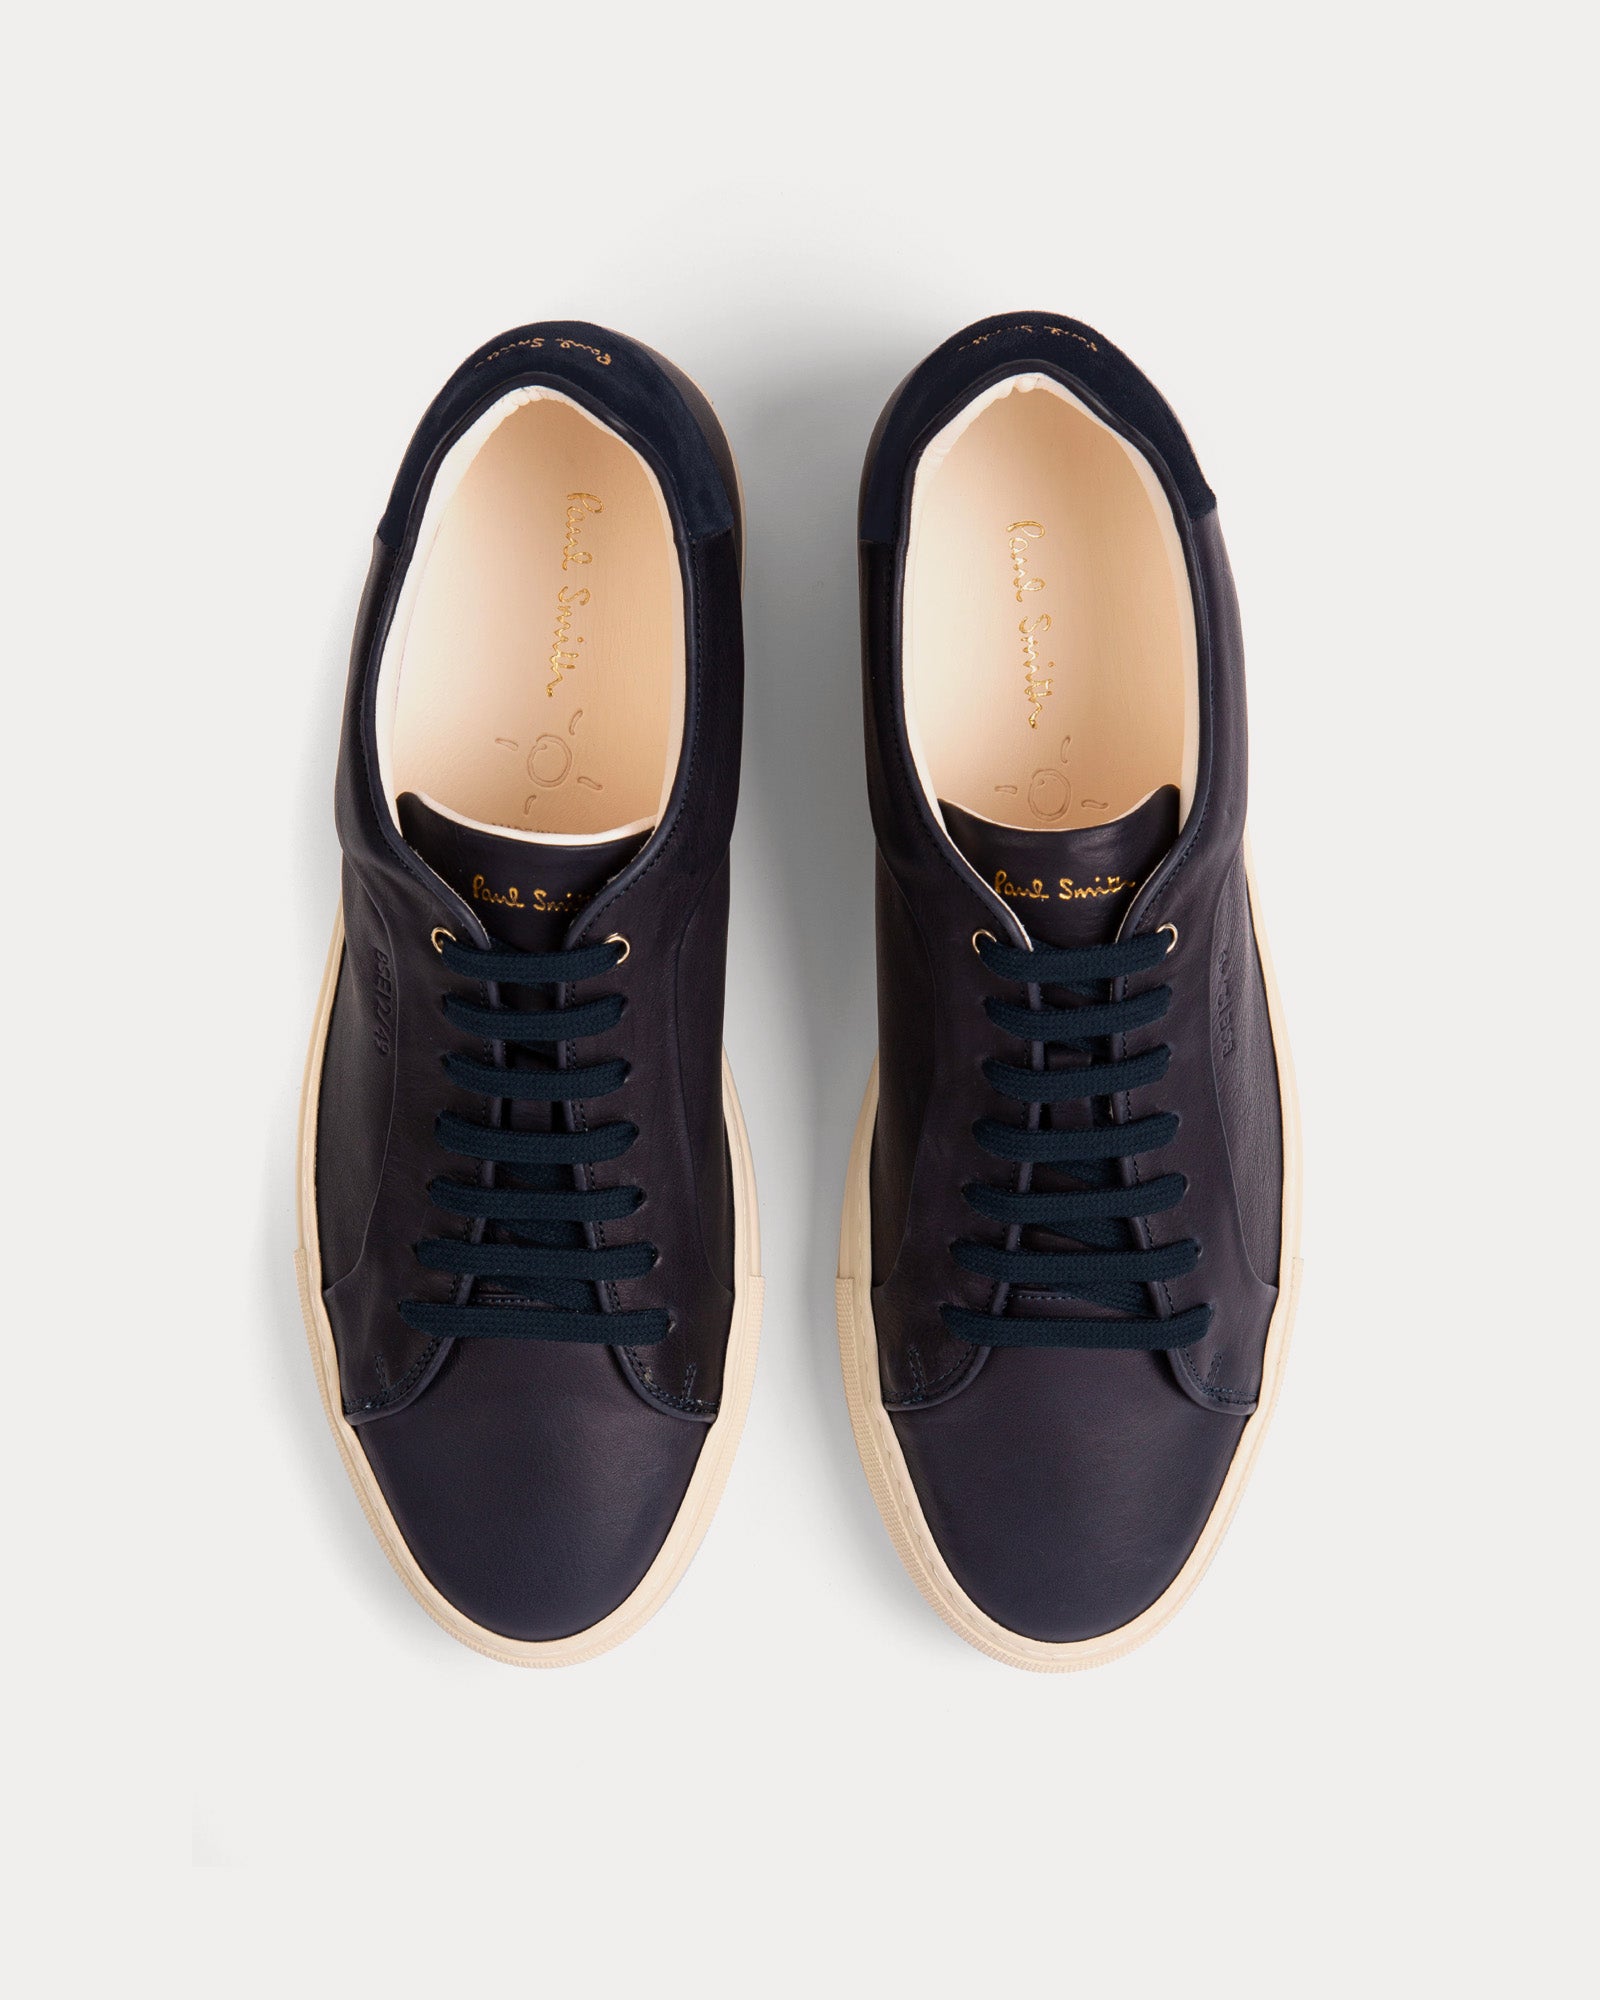 Paul Smith - Basso Eco Leather Navy Low Top Sneakers